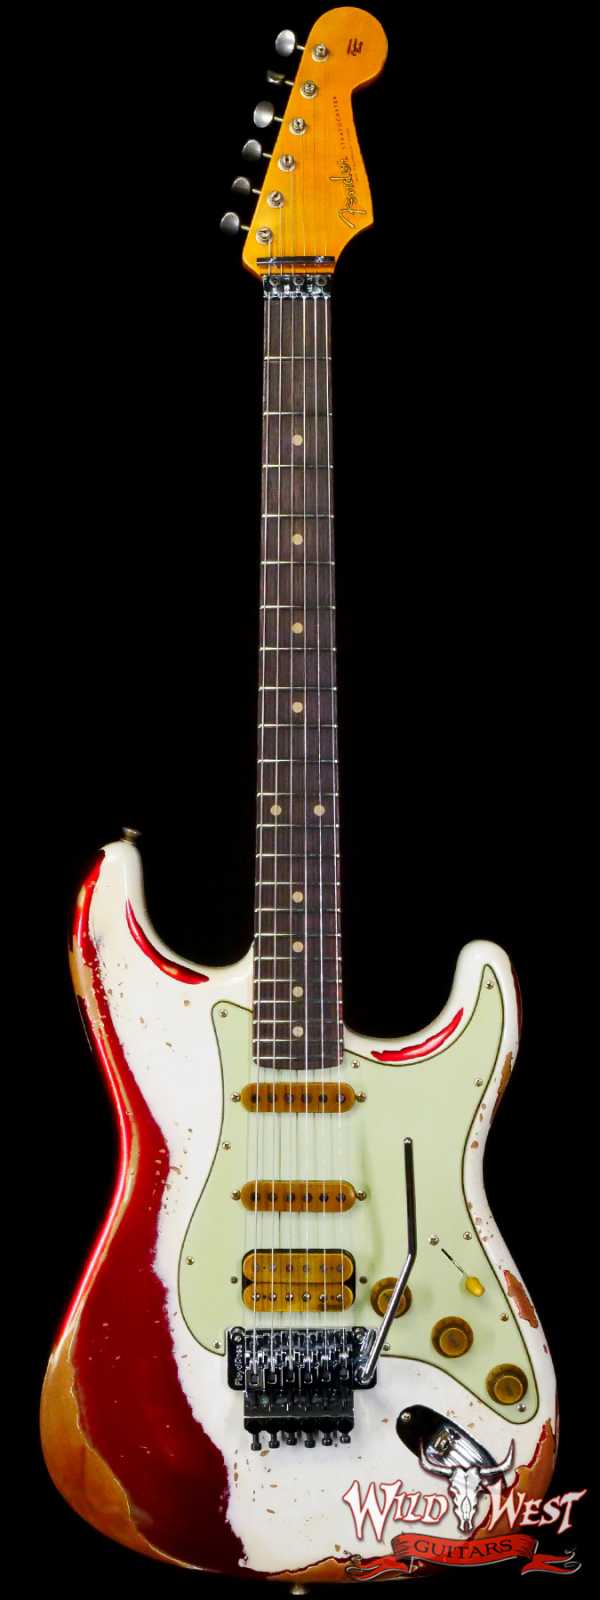 Fender Custom Shop Wild West White Lightning Stratocaster HSS Floyd Rose Rosewood Board 22 Frets Heavy Relic Candy Apple Red